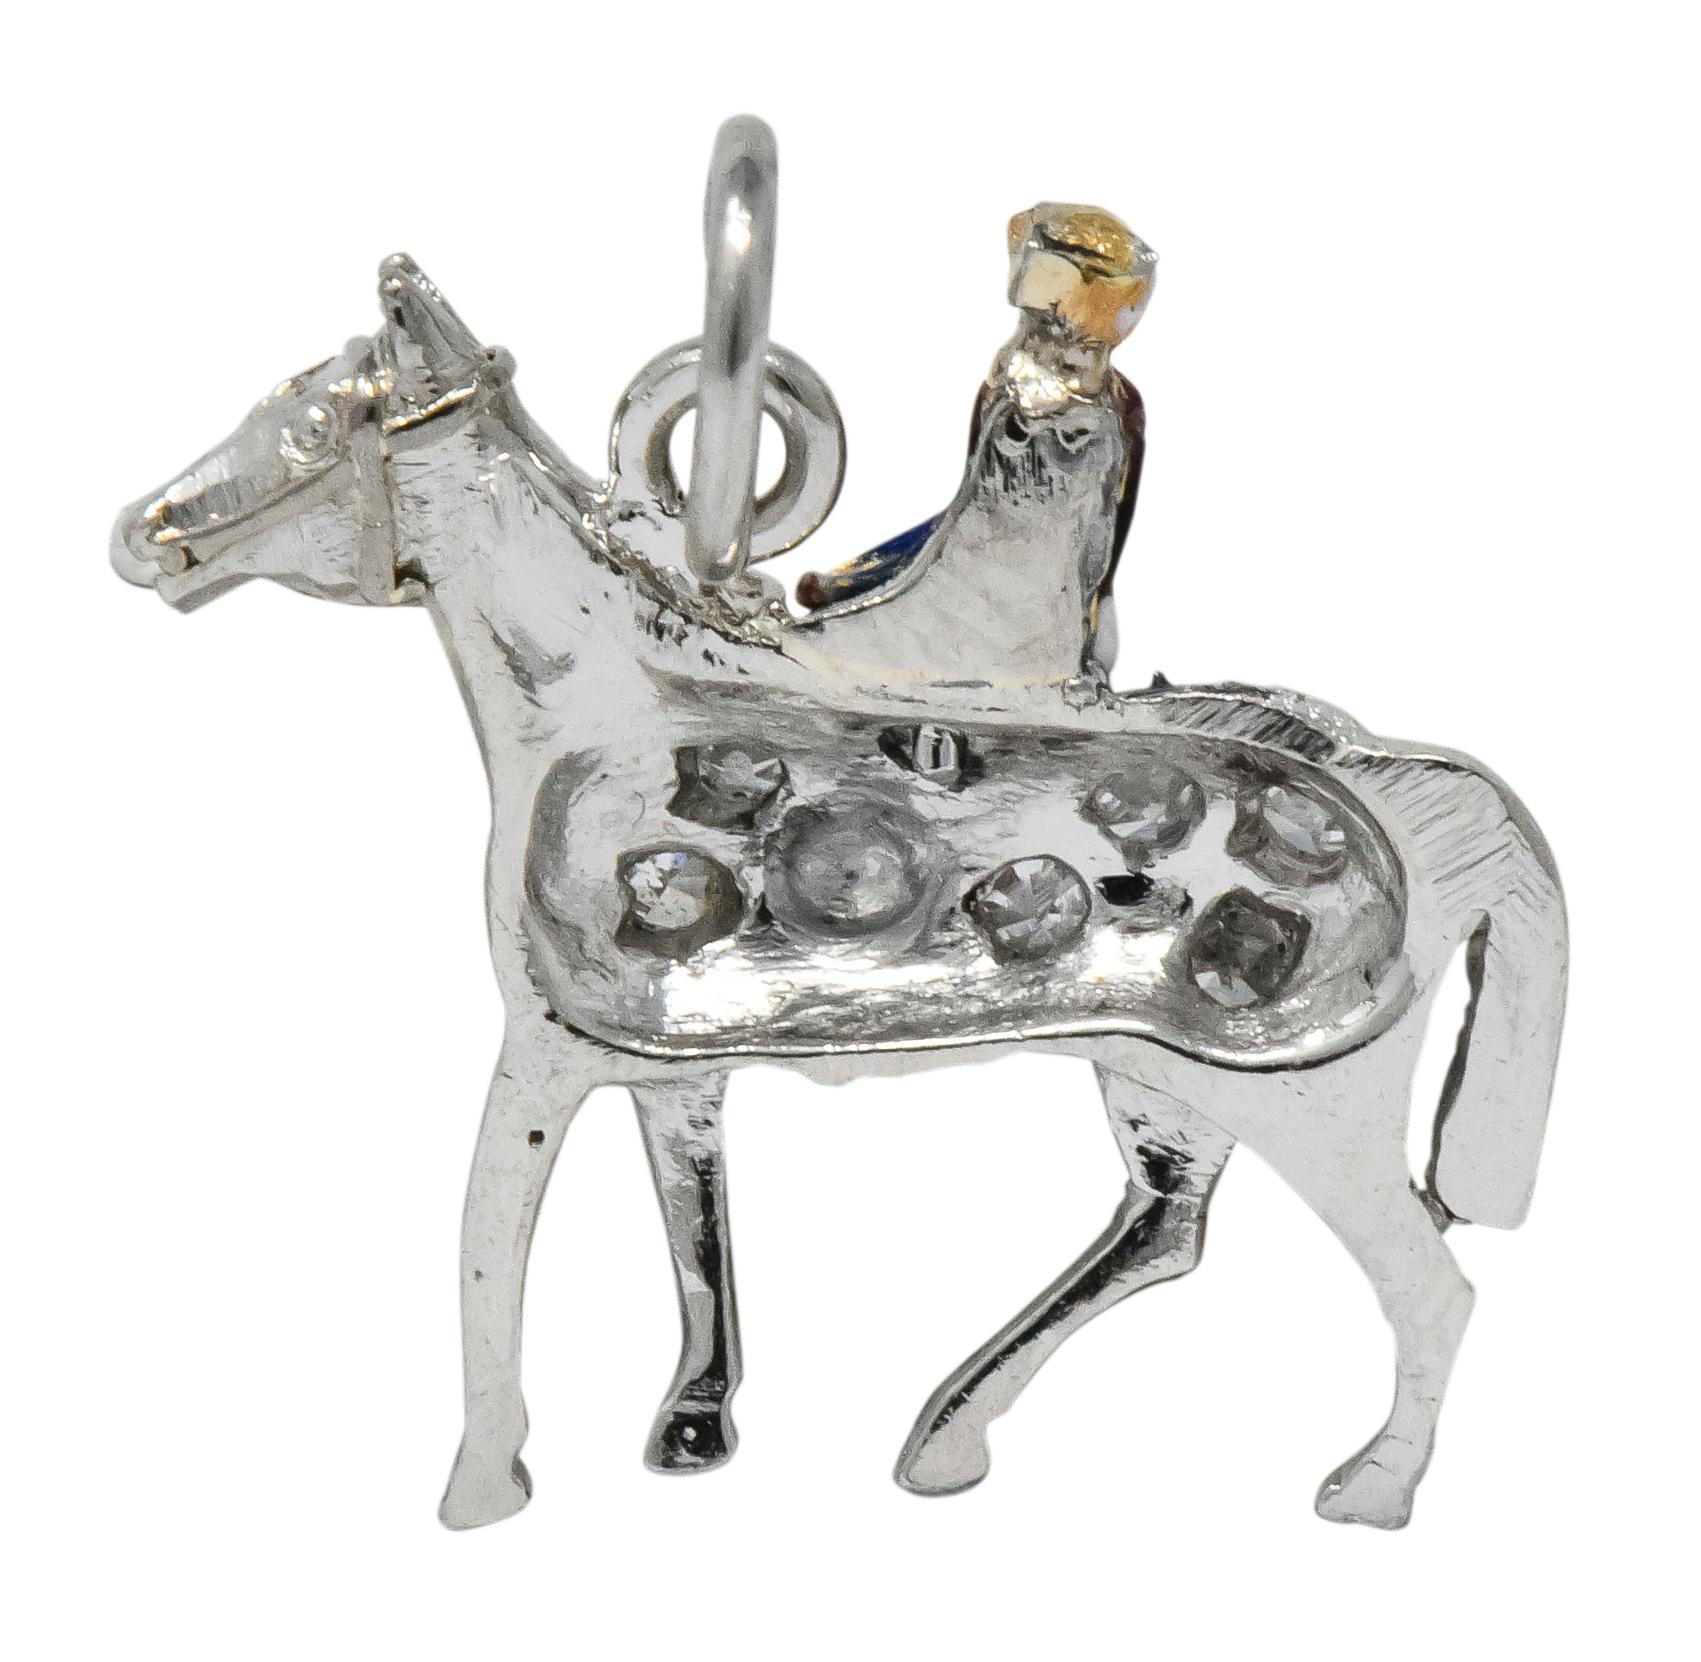 Charm is designed as colorful jockey riding a pavé set platinum horse

Jockey features red, white, and blue enamel with gold details; features some loss consistent to age, wear, and use

Trotting horse is set throughout with rose cut and single cut